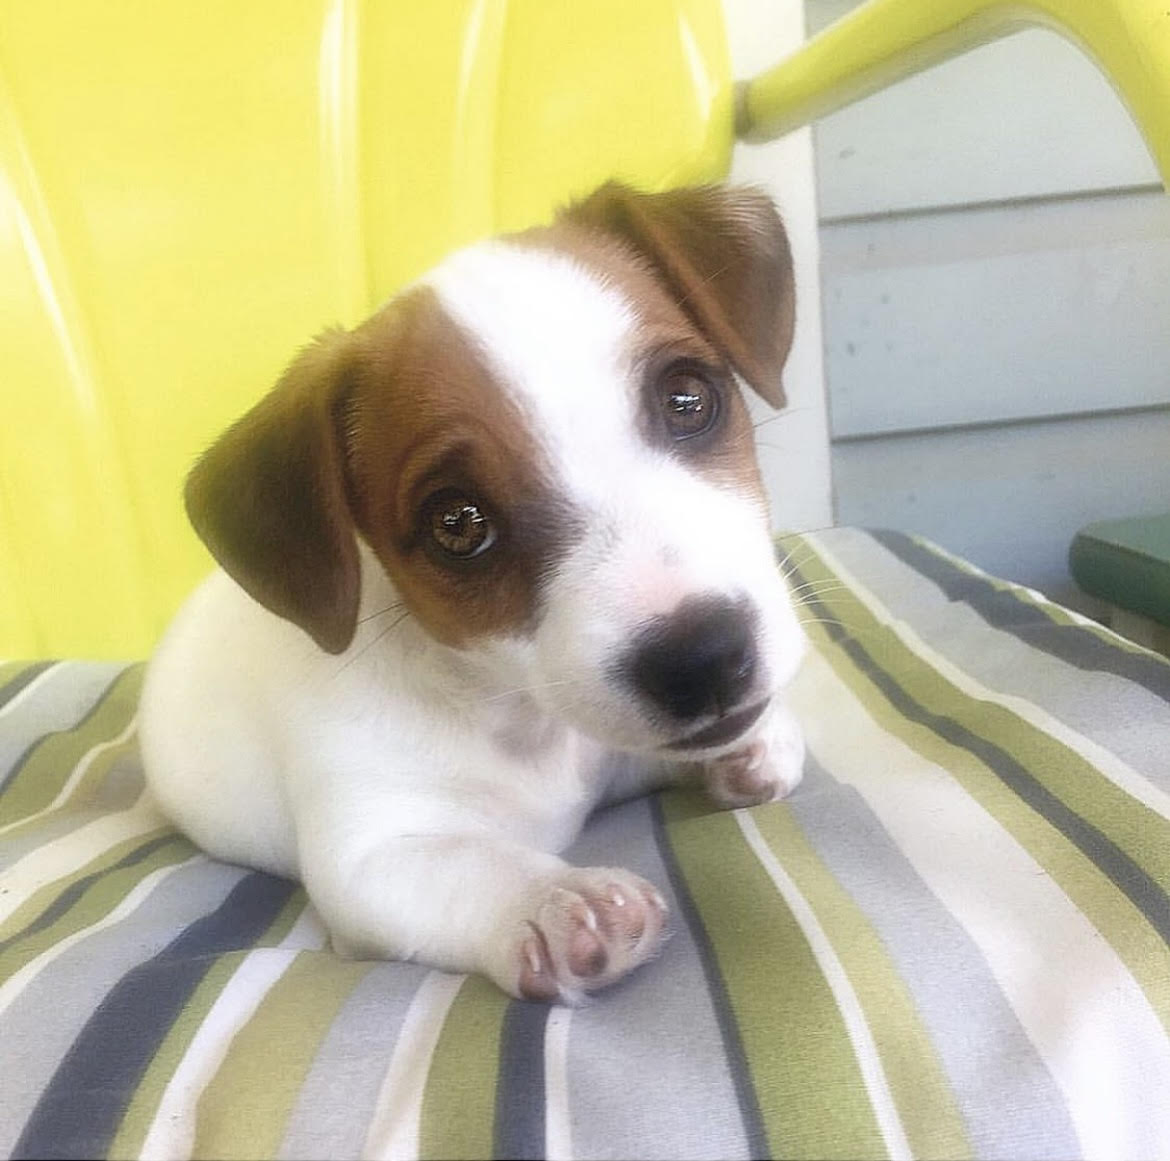 happy monday from smol me🥹

#throwback #astropuppy #jackrussellpuppy #puppylove #jackrussellnation #9gag #barked #jrt #jackrusselldog #astro #dogs  #dog #cute #cuteness #cutenessoverload #doggo #doglovers #doglove #doglife #happydog